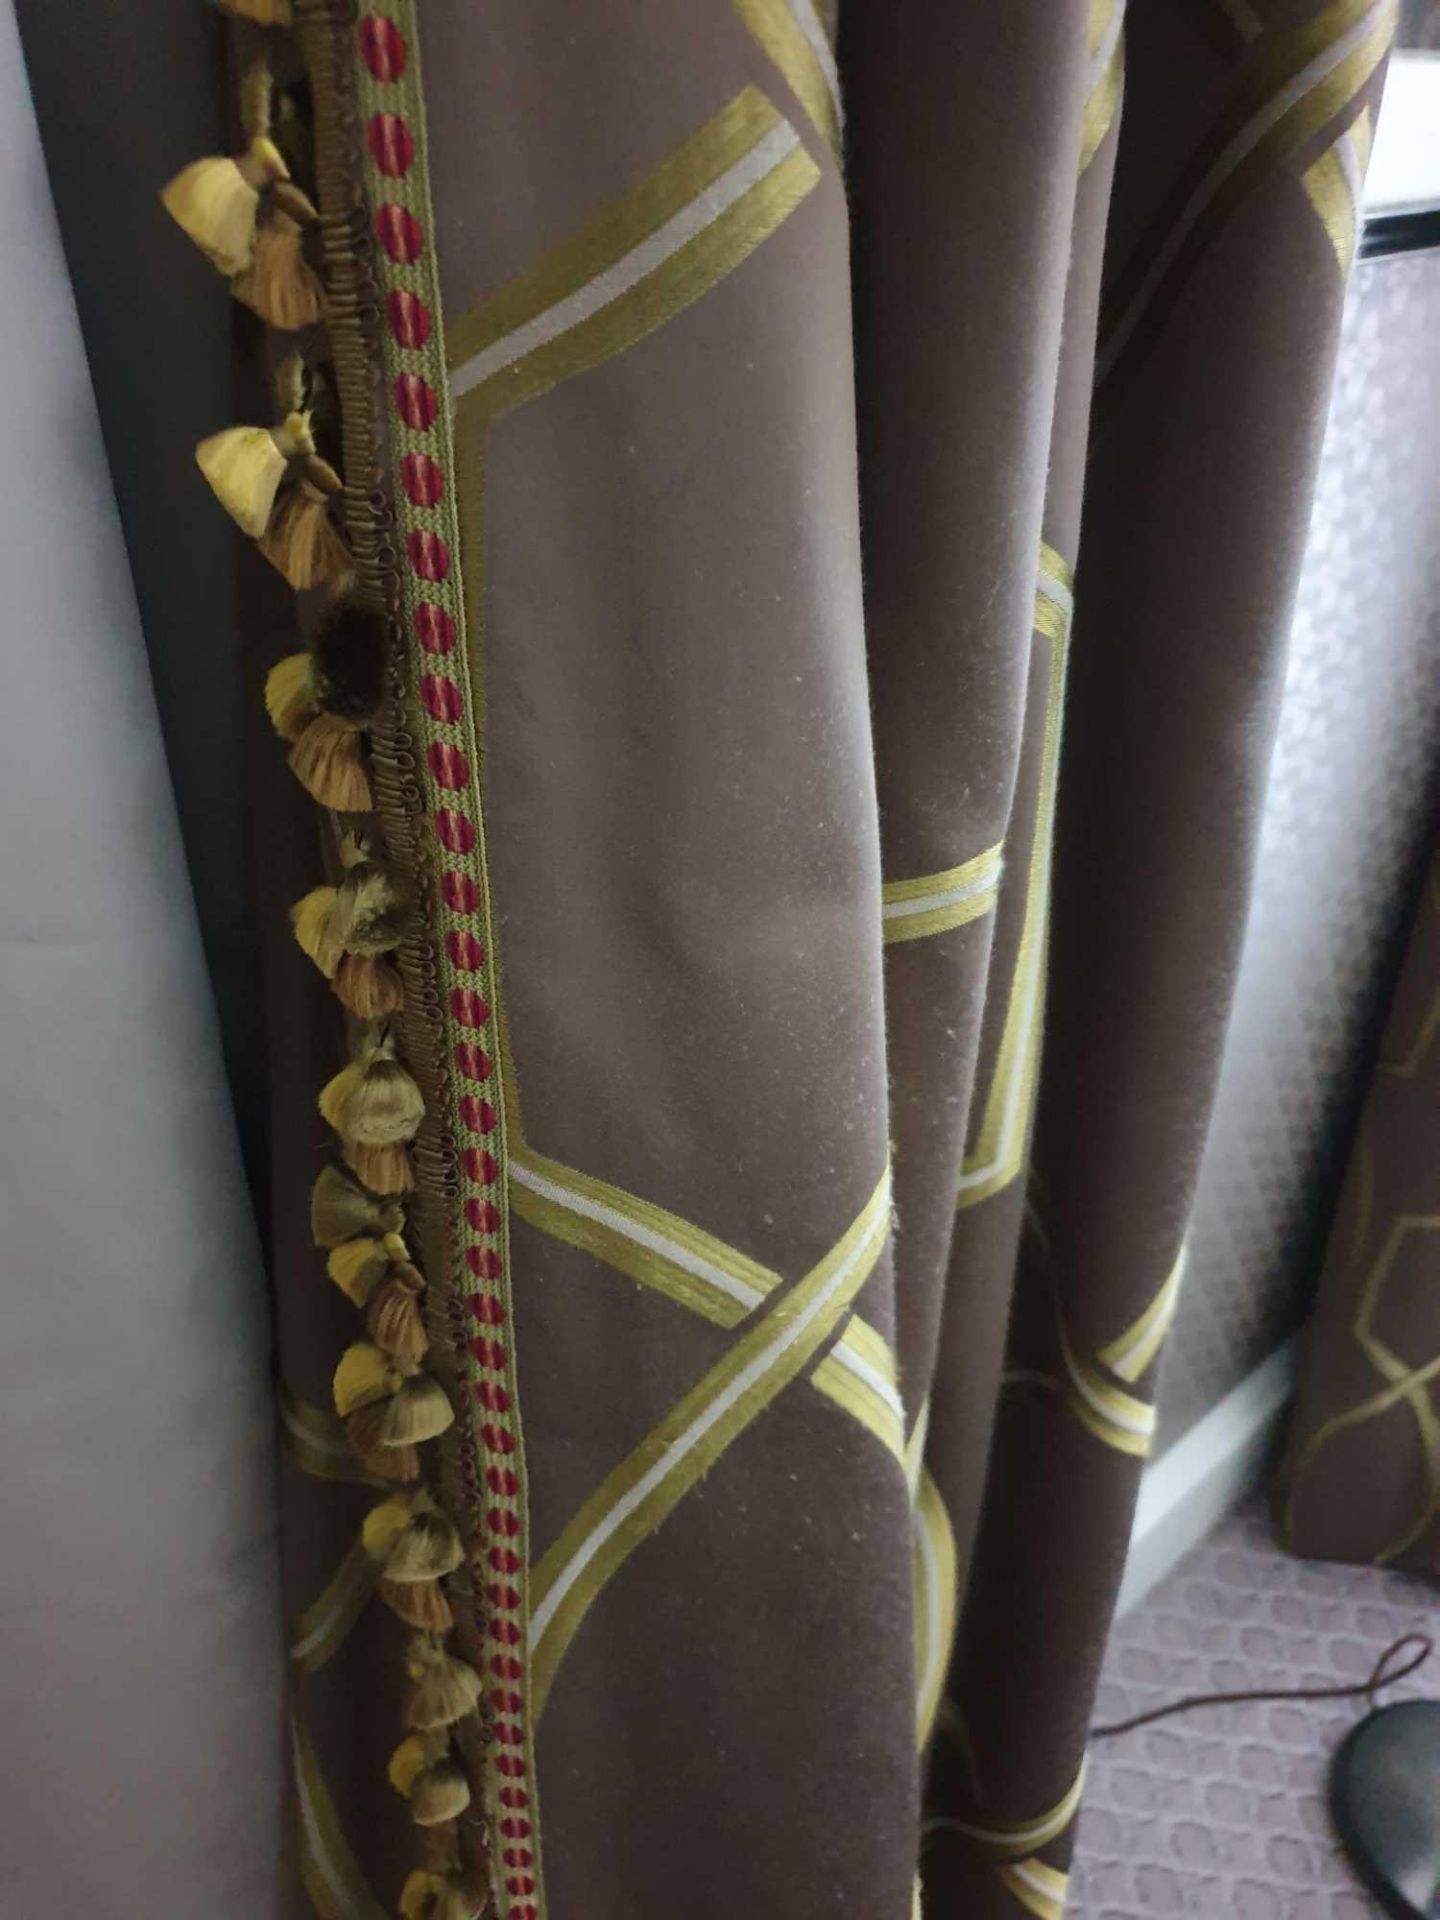 A Pair Of Silk Drapes And Jabots Dark Grey With Grey And Green Chain Style Pattern Tassel Trim And - Image 4 of 4